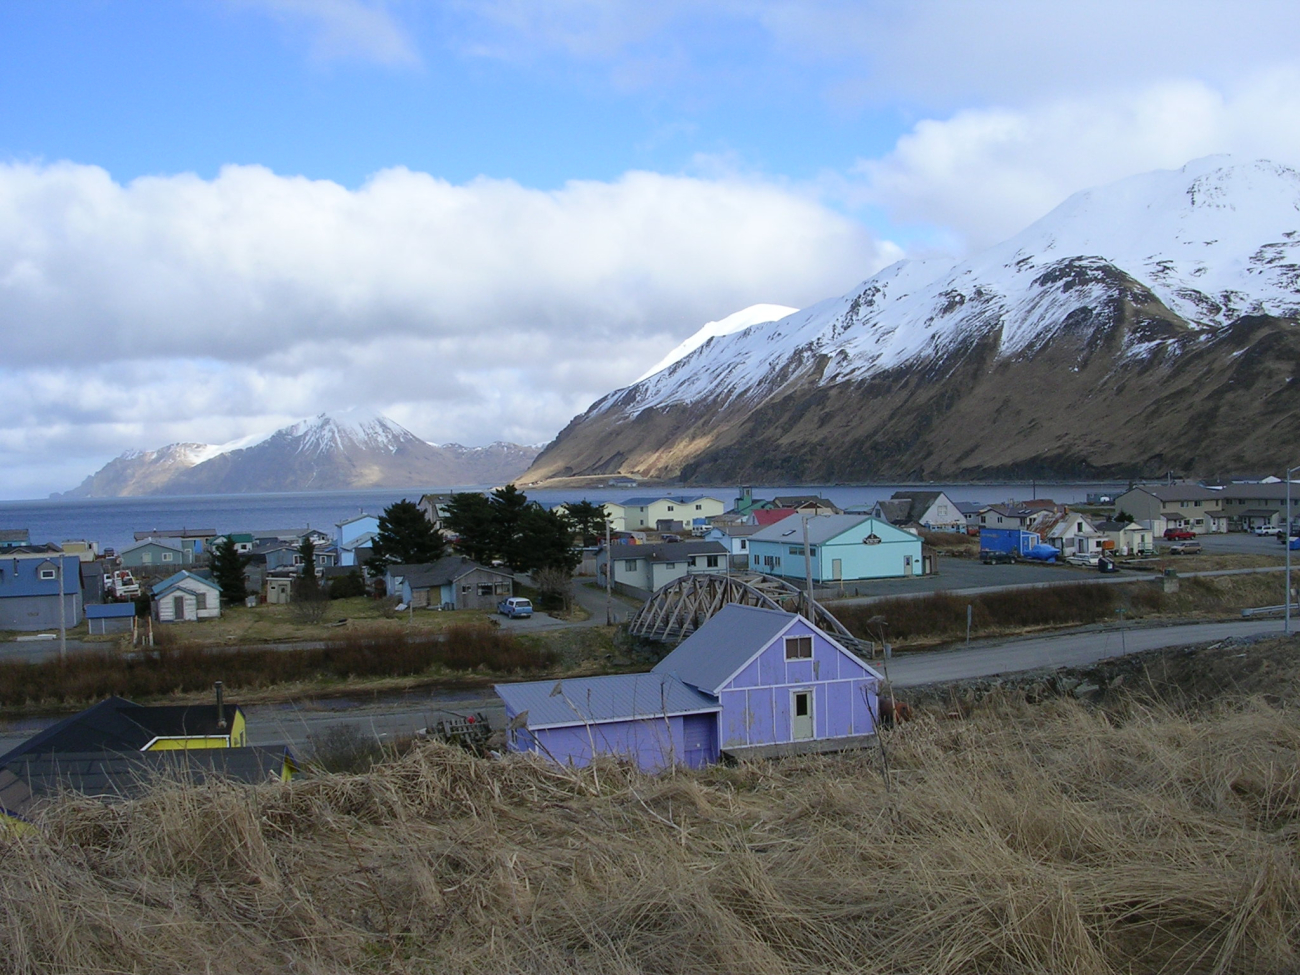 Looking over some of the residences of Dutch Harbor